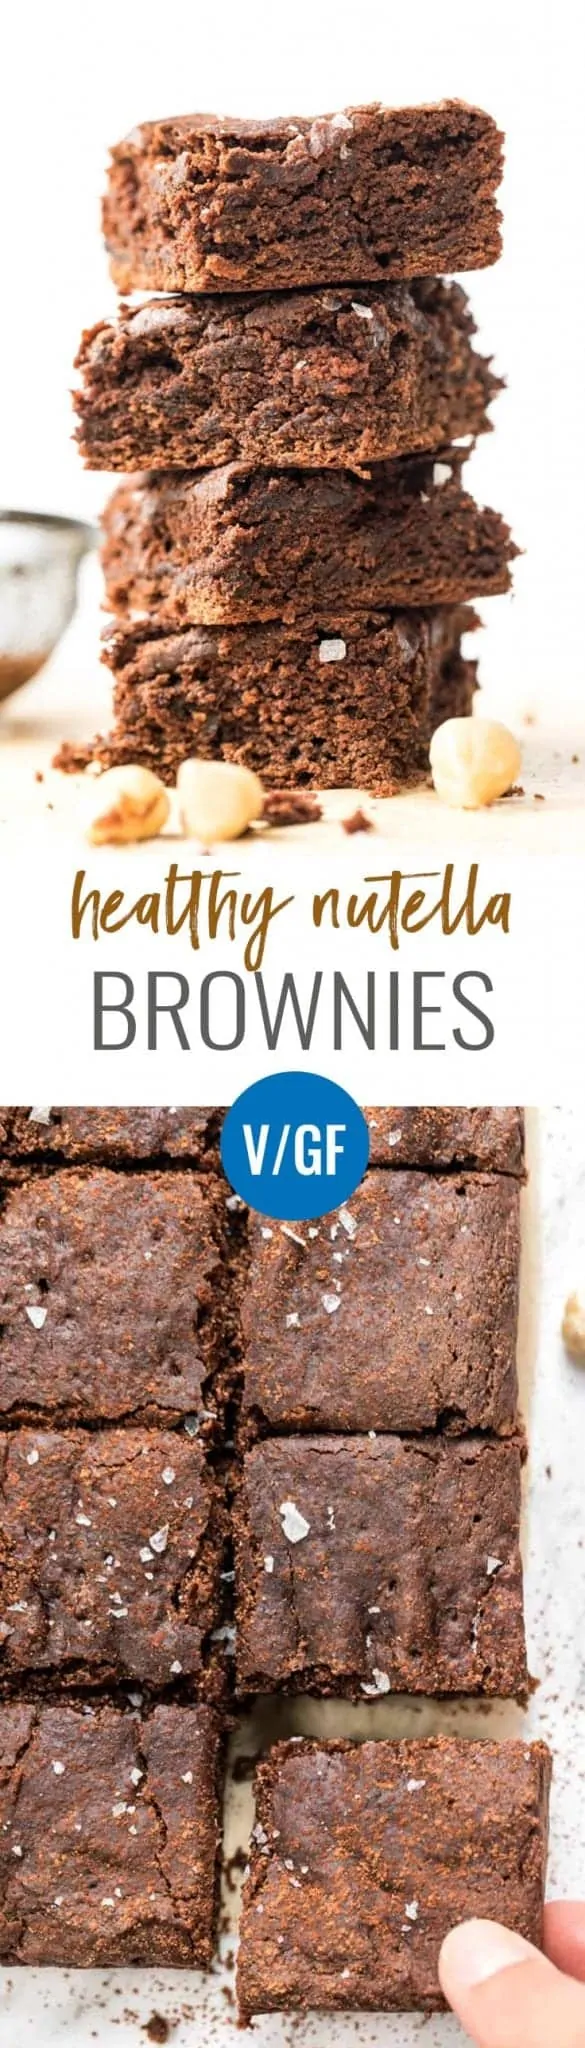 vegan nutella brownies with homemade nutella and quinoa flour for a healthy treat